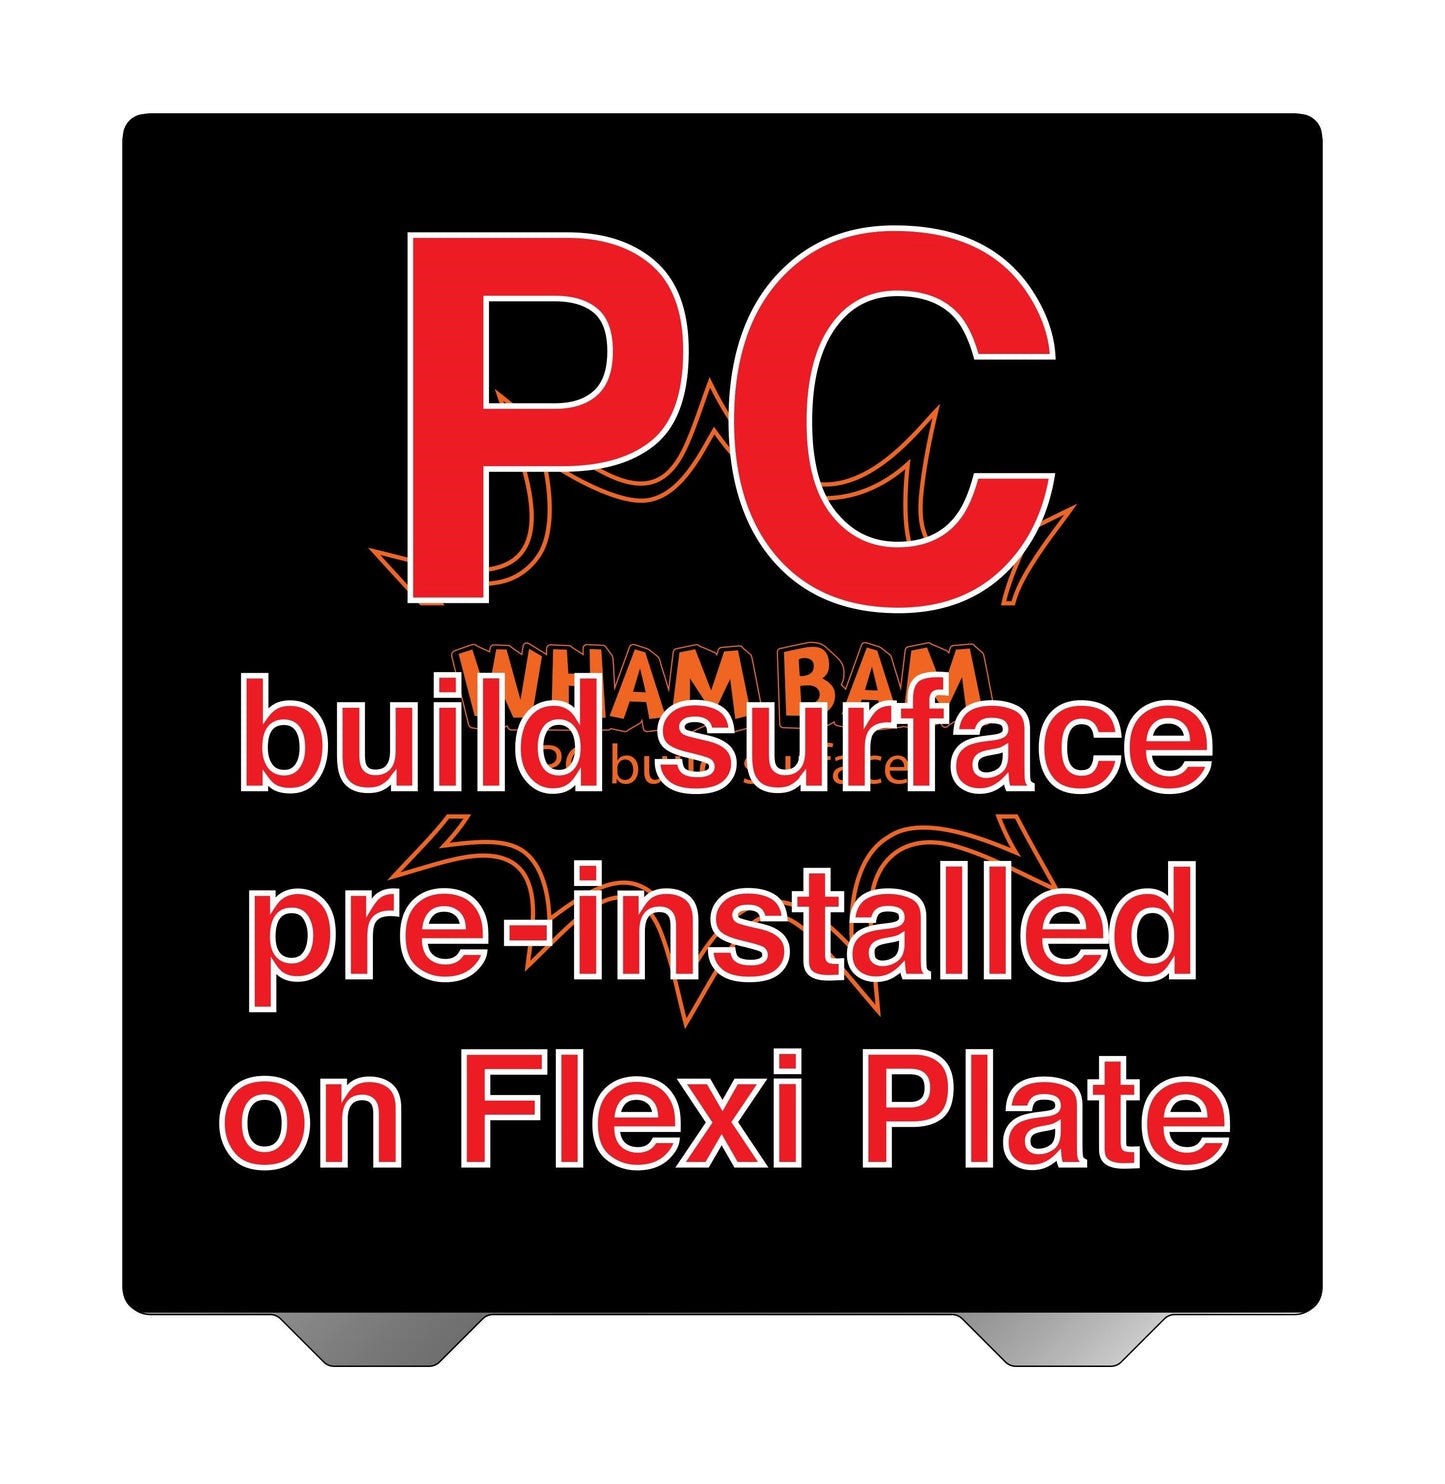 Flexi Plate with Pre-Installed PC Build Surface (Classic Black) - 410 x 410 - Creality CR-10 S4, Voron Core XY